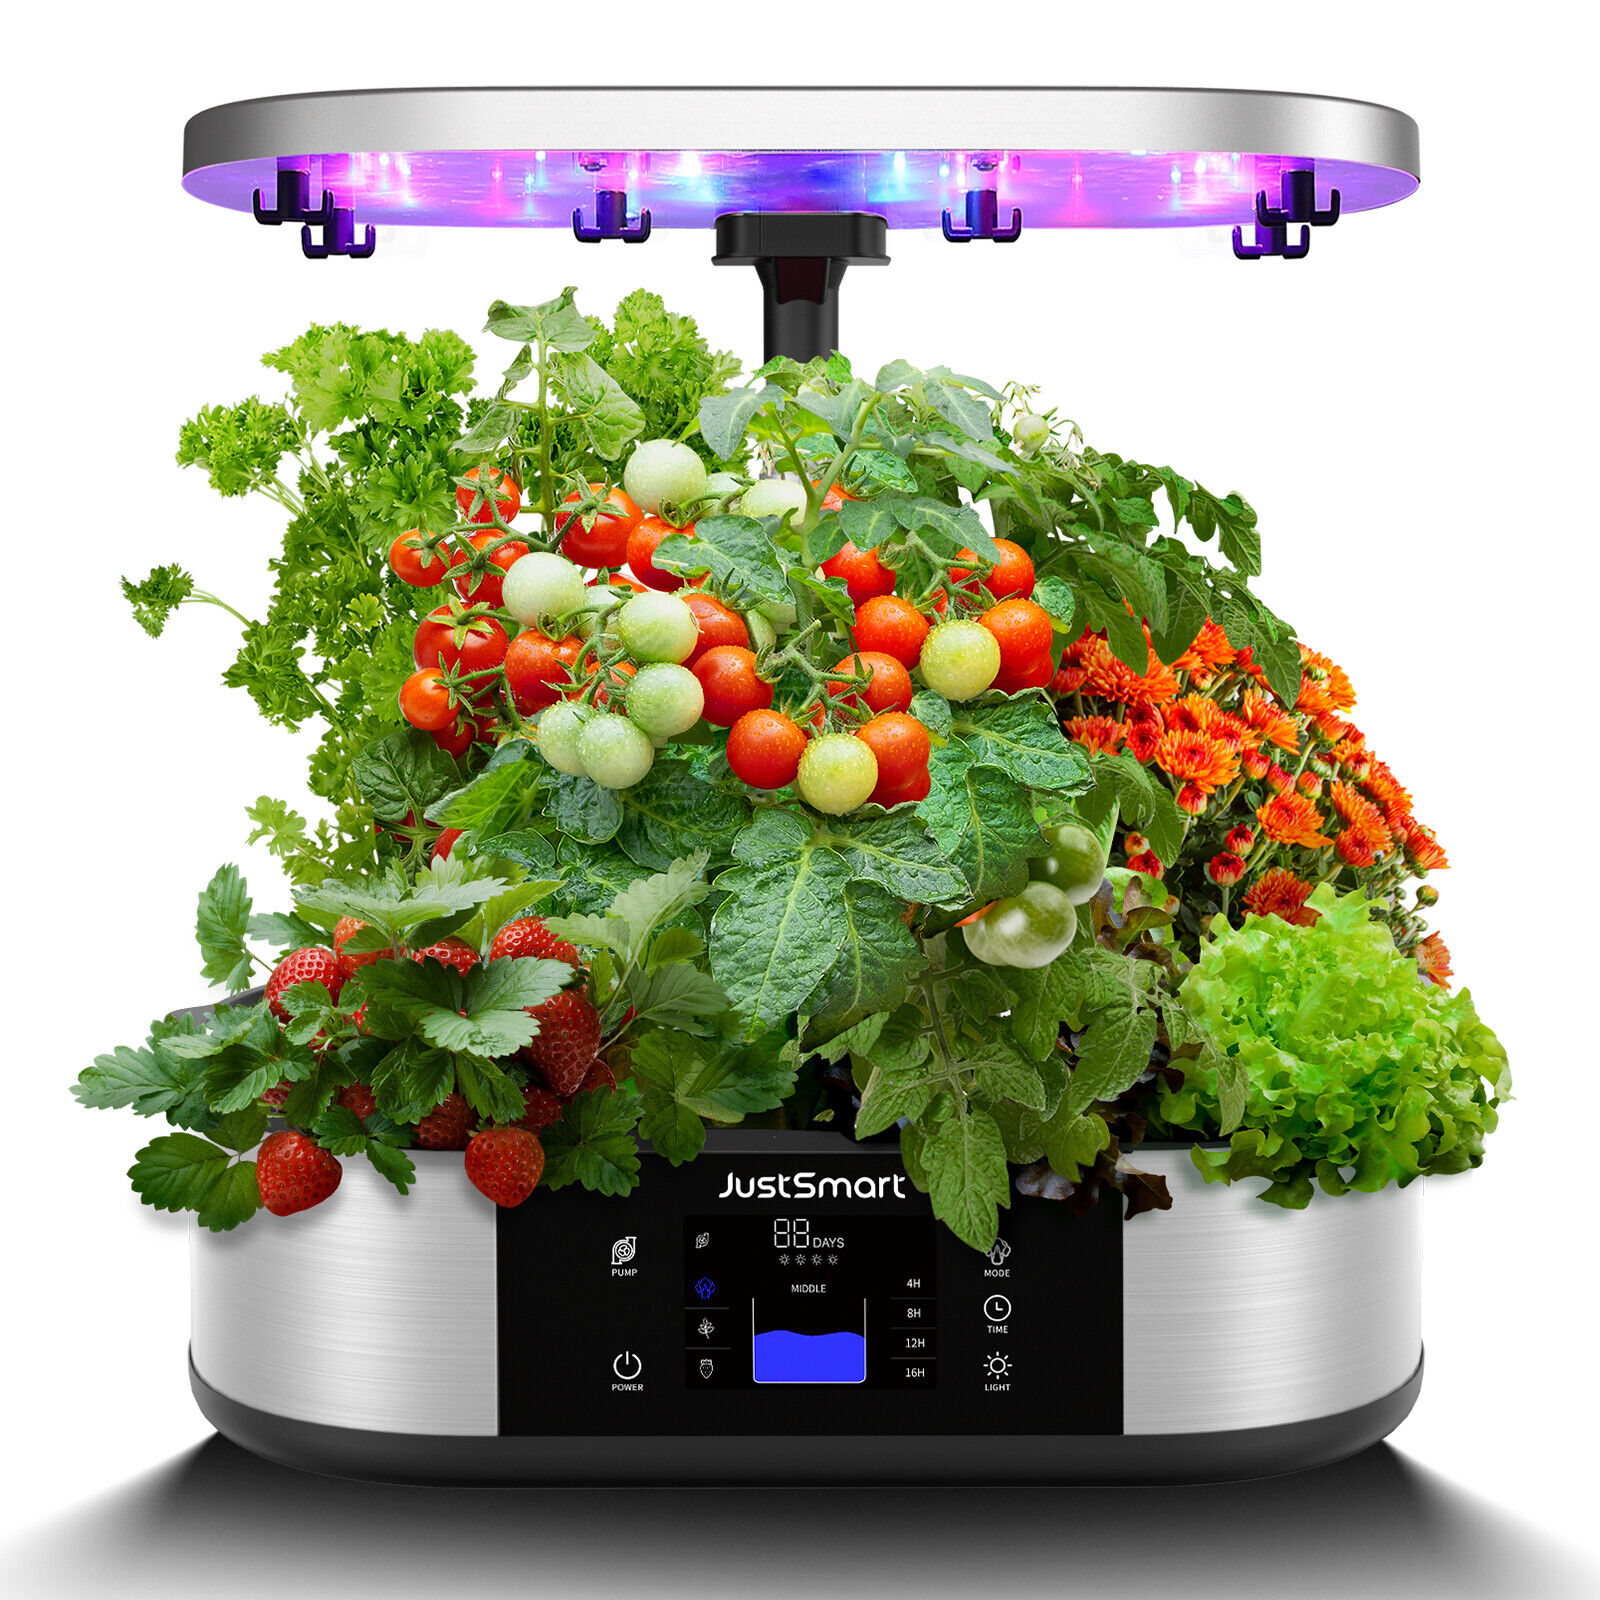 12 Pods Hydroponics Growing System w/LED Grow Light Timer Indoor Herb Garden Kit